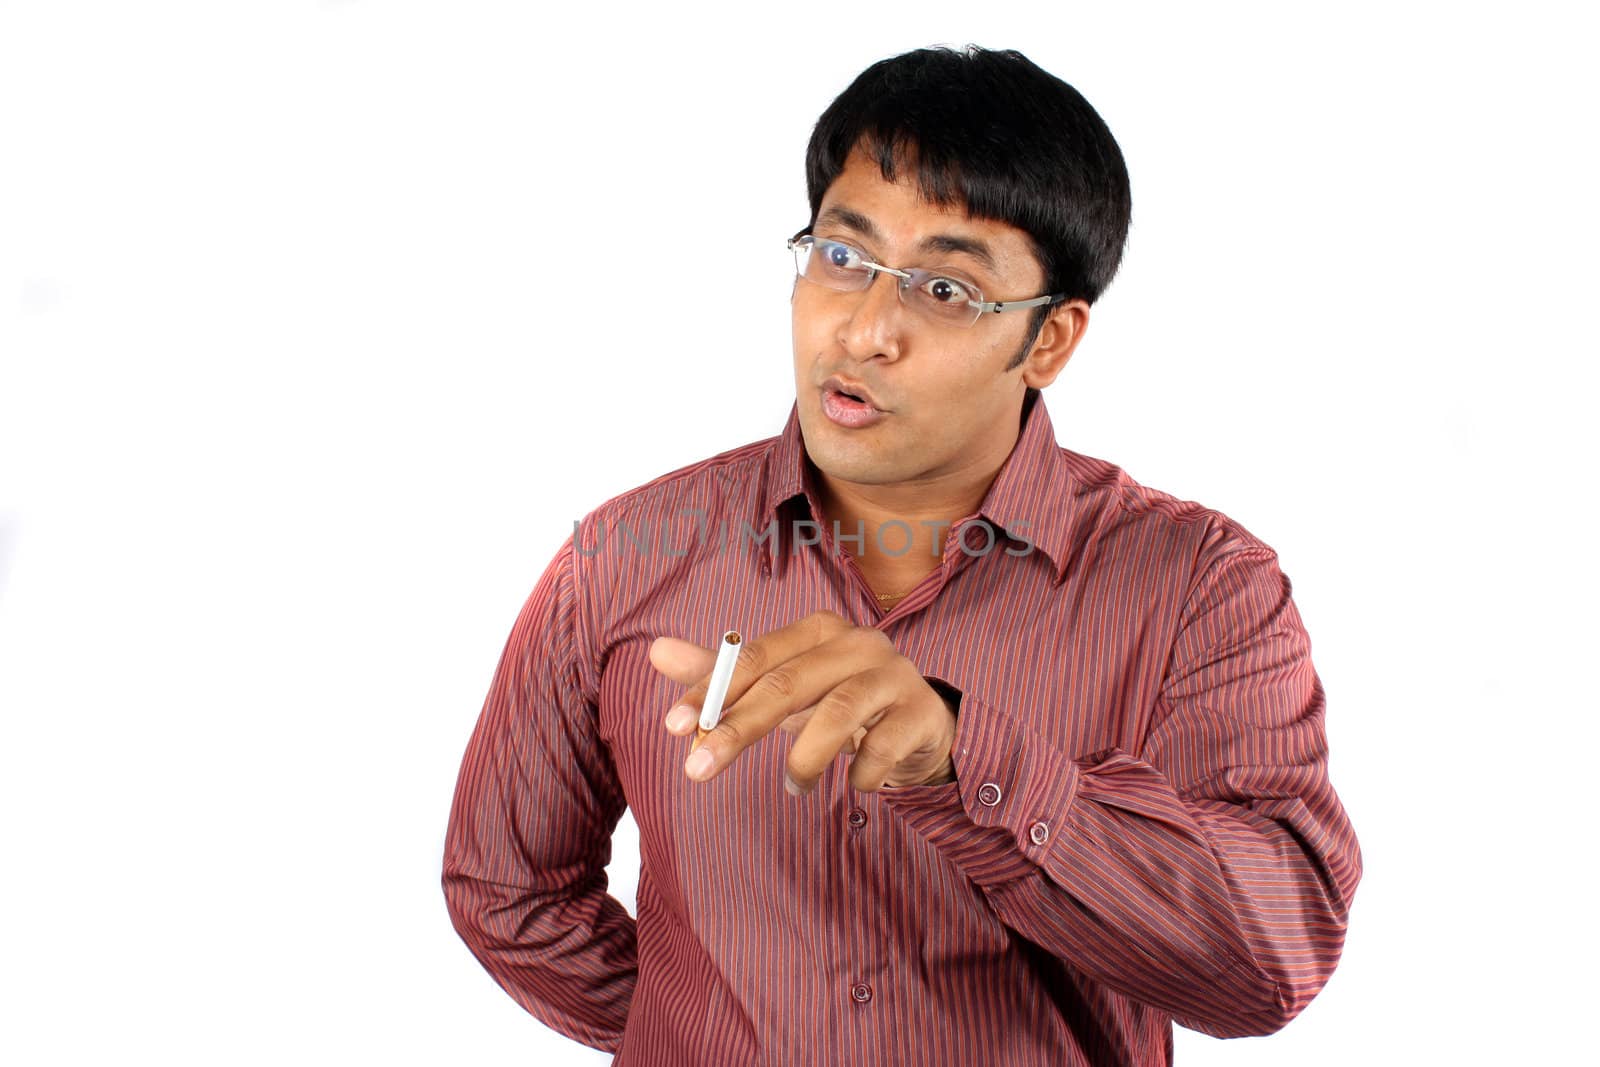 An Indian guy holding a cigarette in an argument, on white studio background.